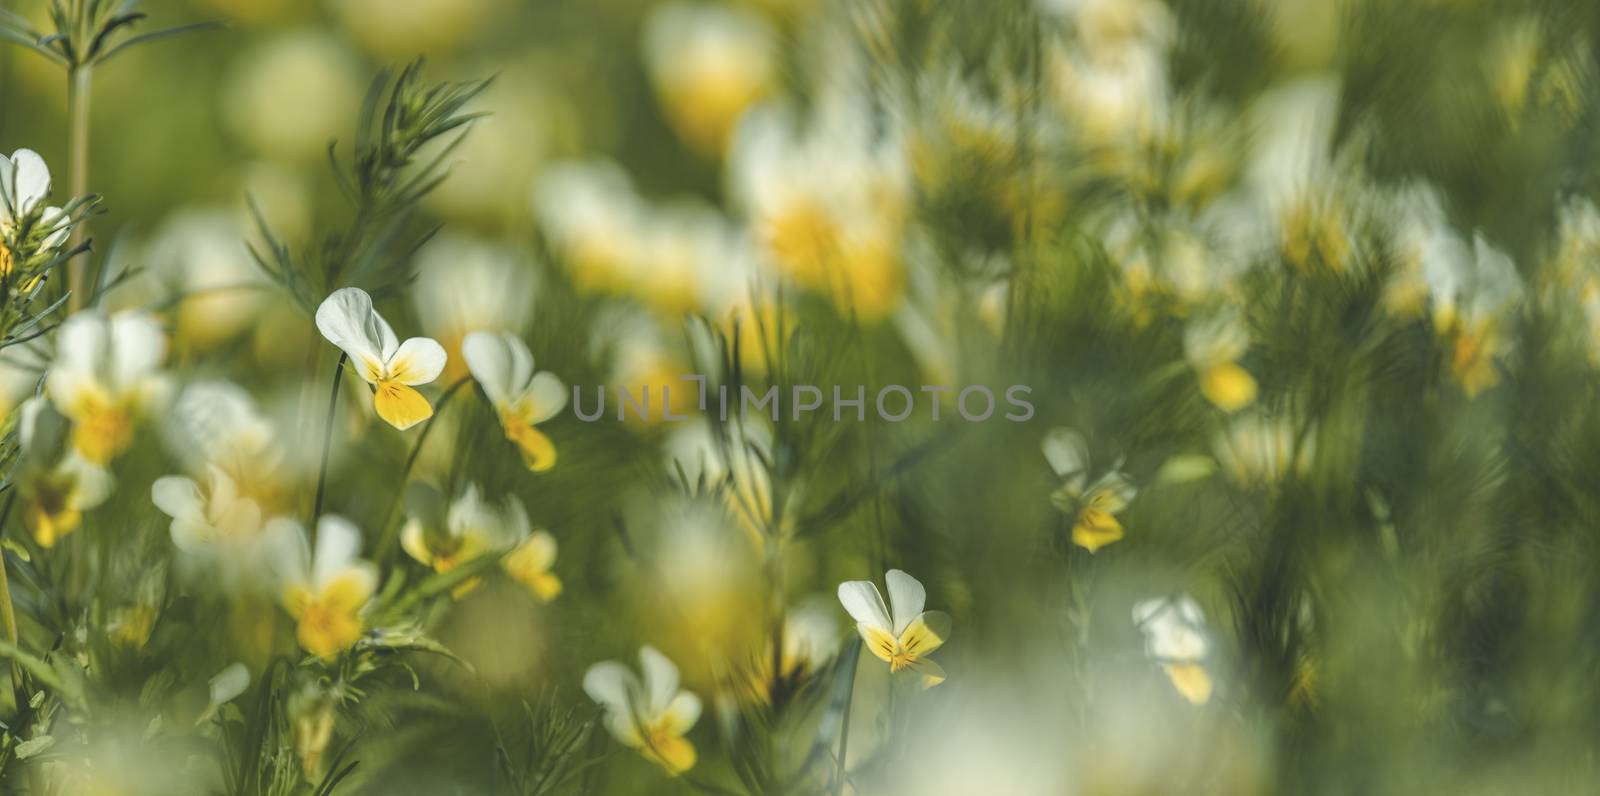 Panoramic view to spring background art with blooming snowdrop or wild pansy or heartsease (Viola tricolor) flowers. Beautiful spring background. Copy space.